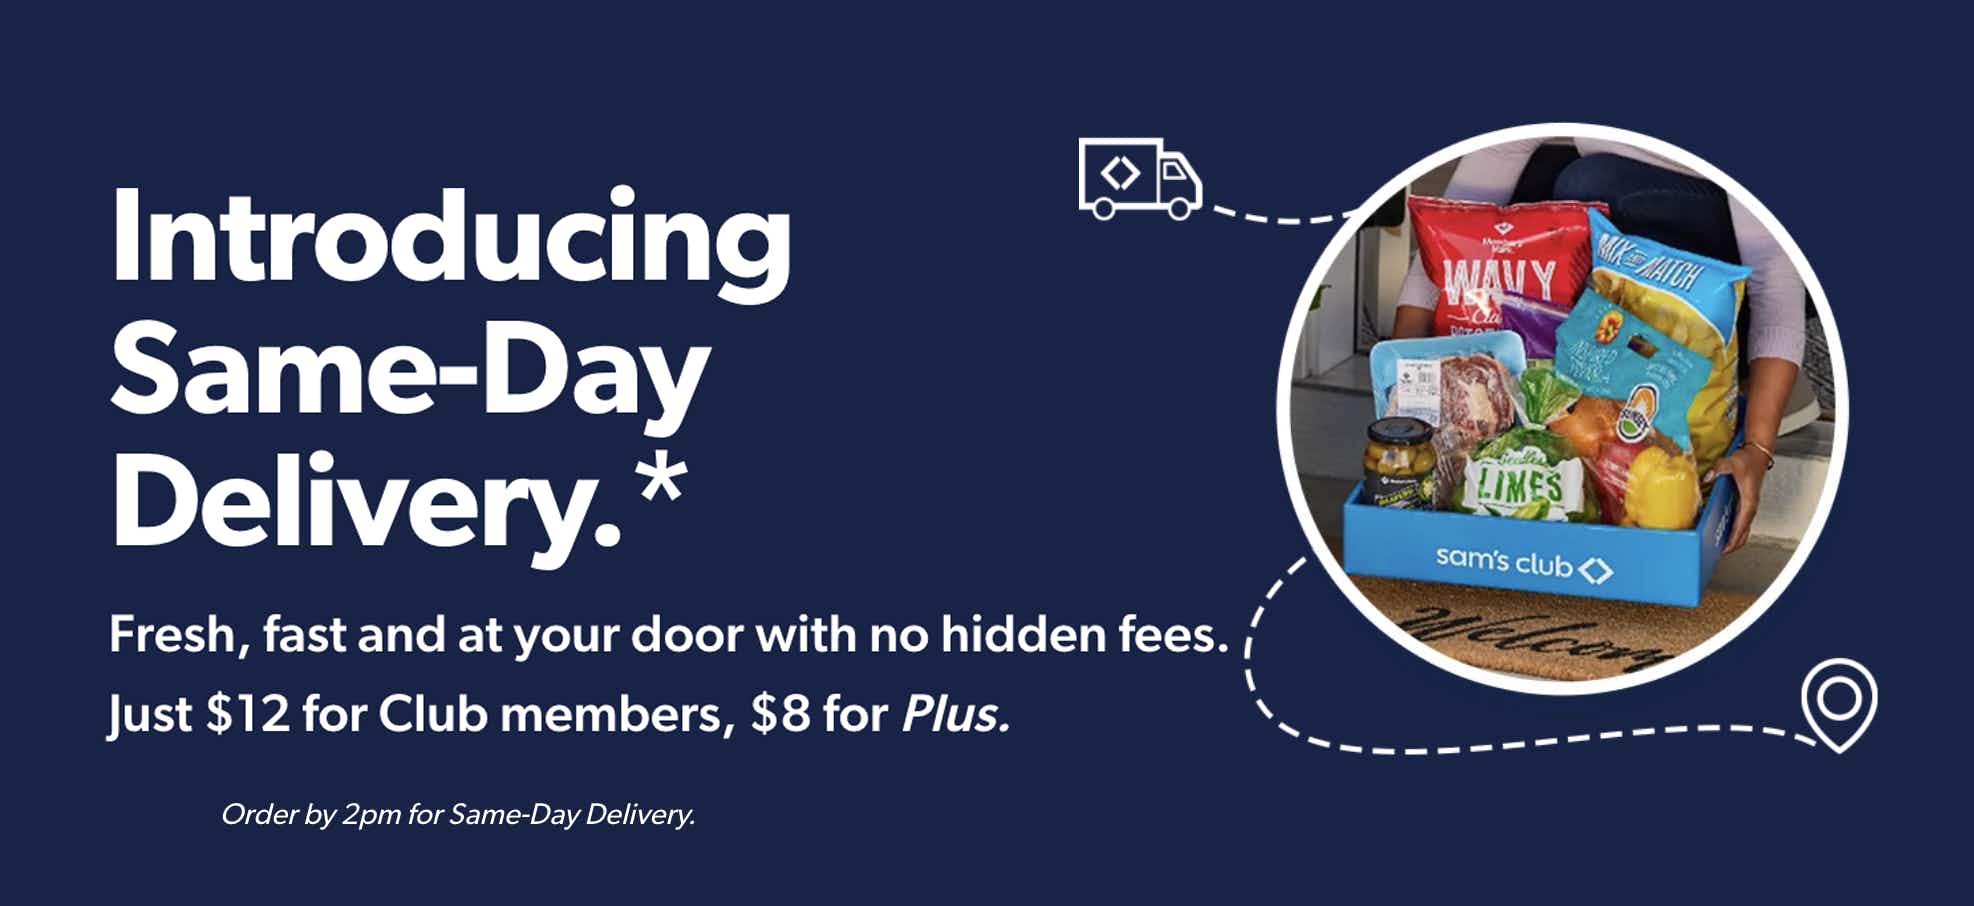 Full List of Stores with Same-Day Delivery - The Krazy Coupon Lady